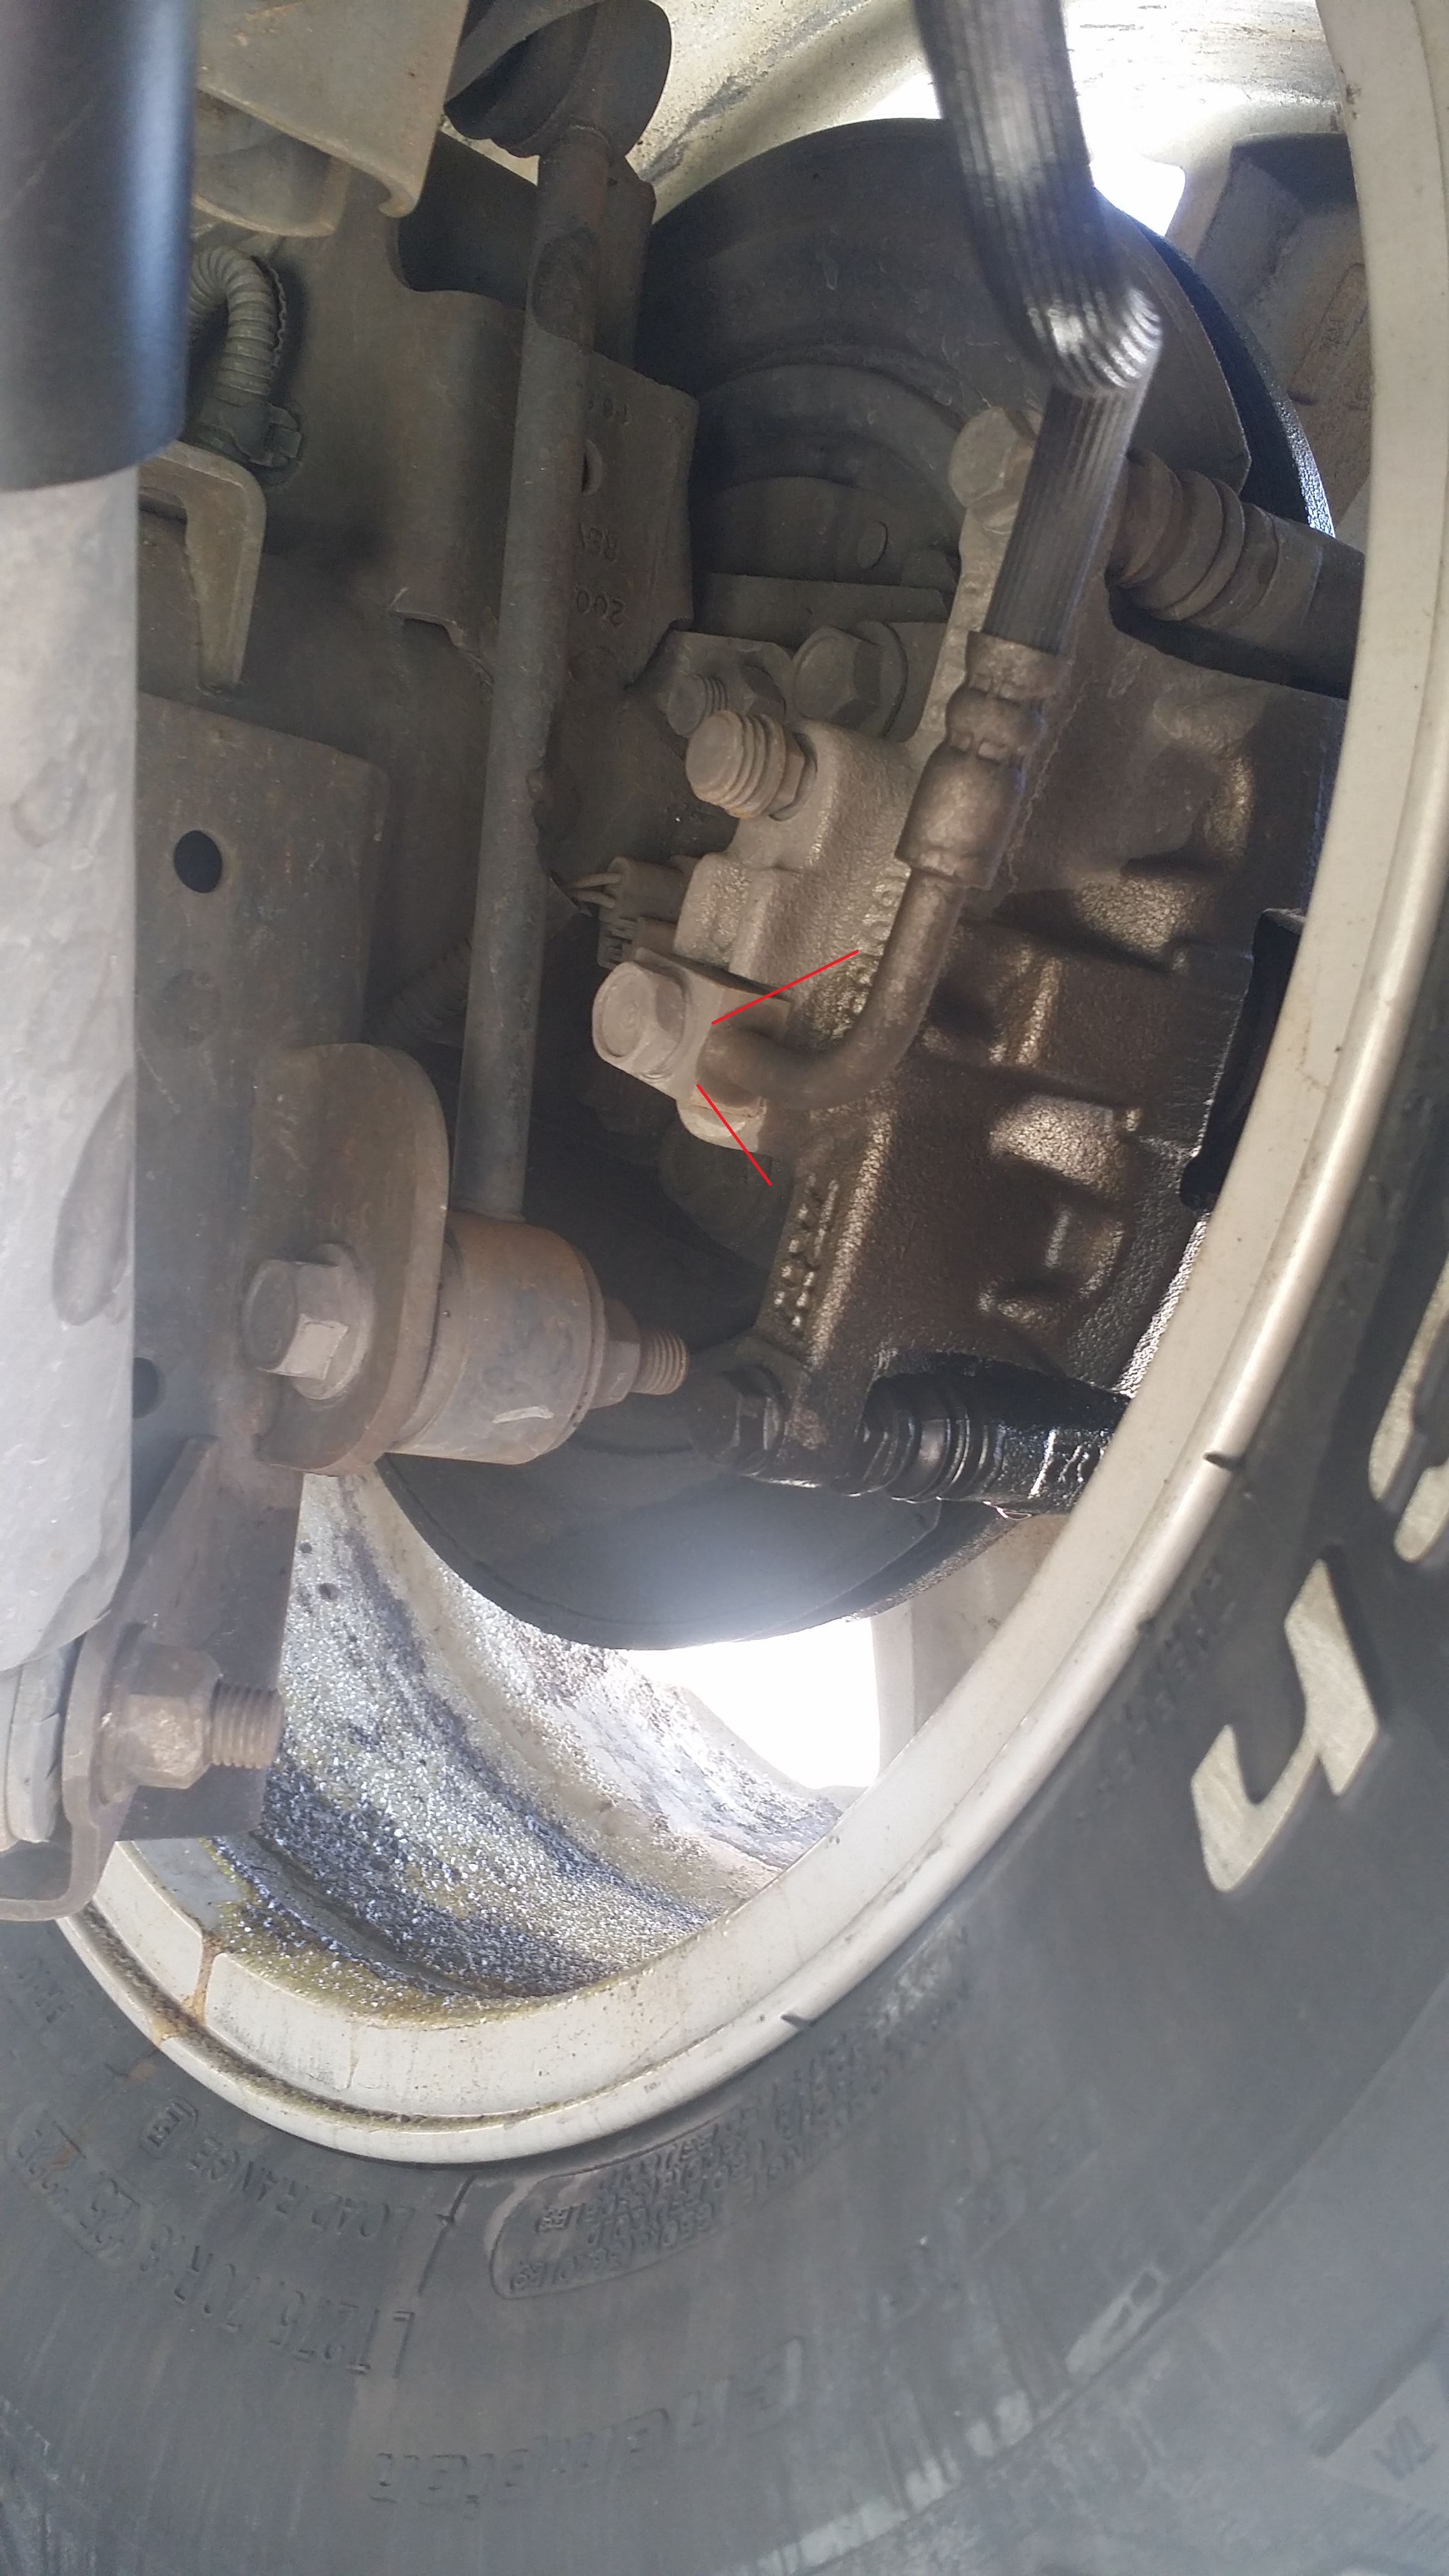 Blew a caliper  - The top destination for Jeep JK and JL  Wrangler news, rumors, and discussion